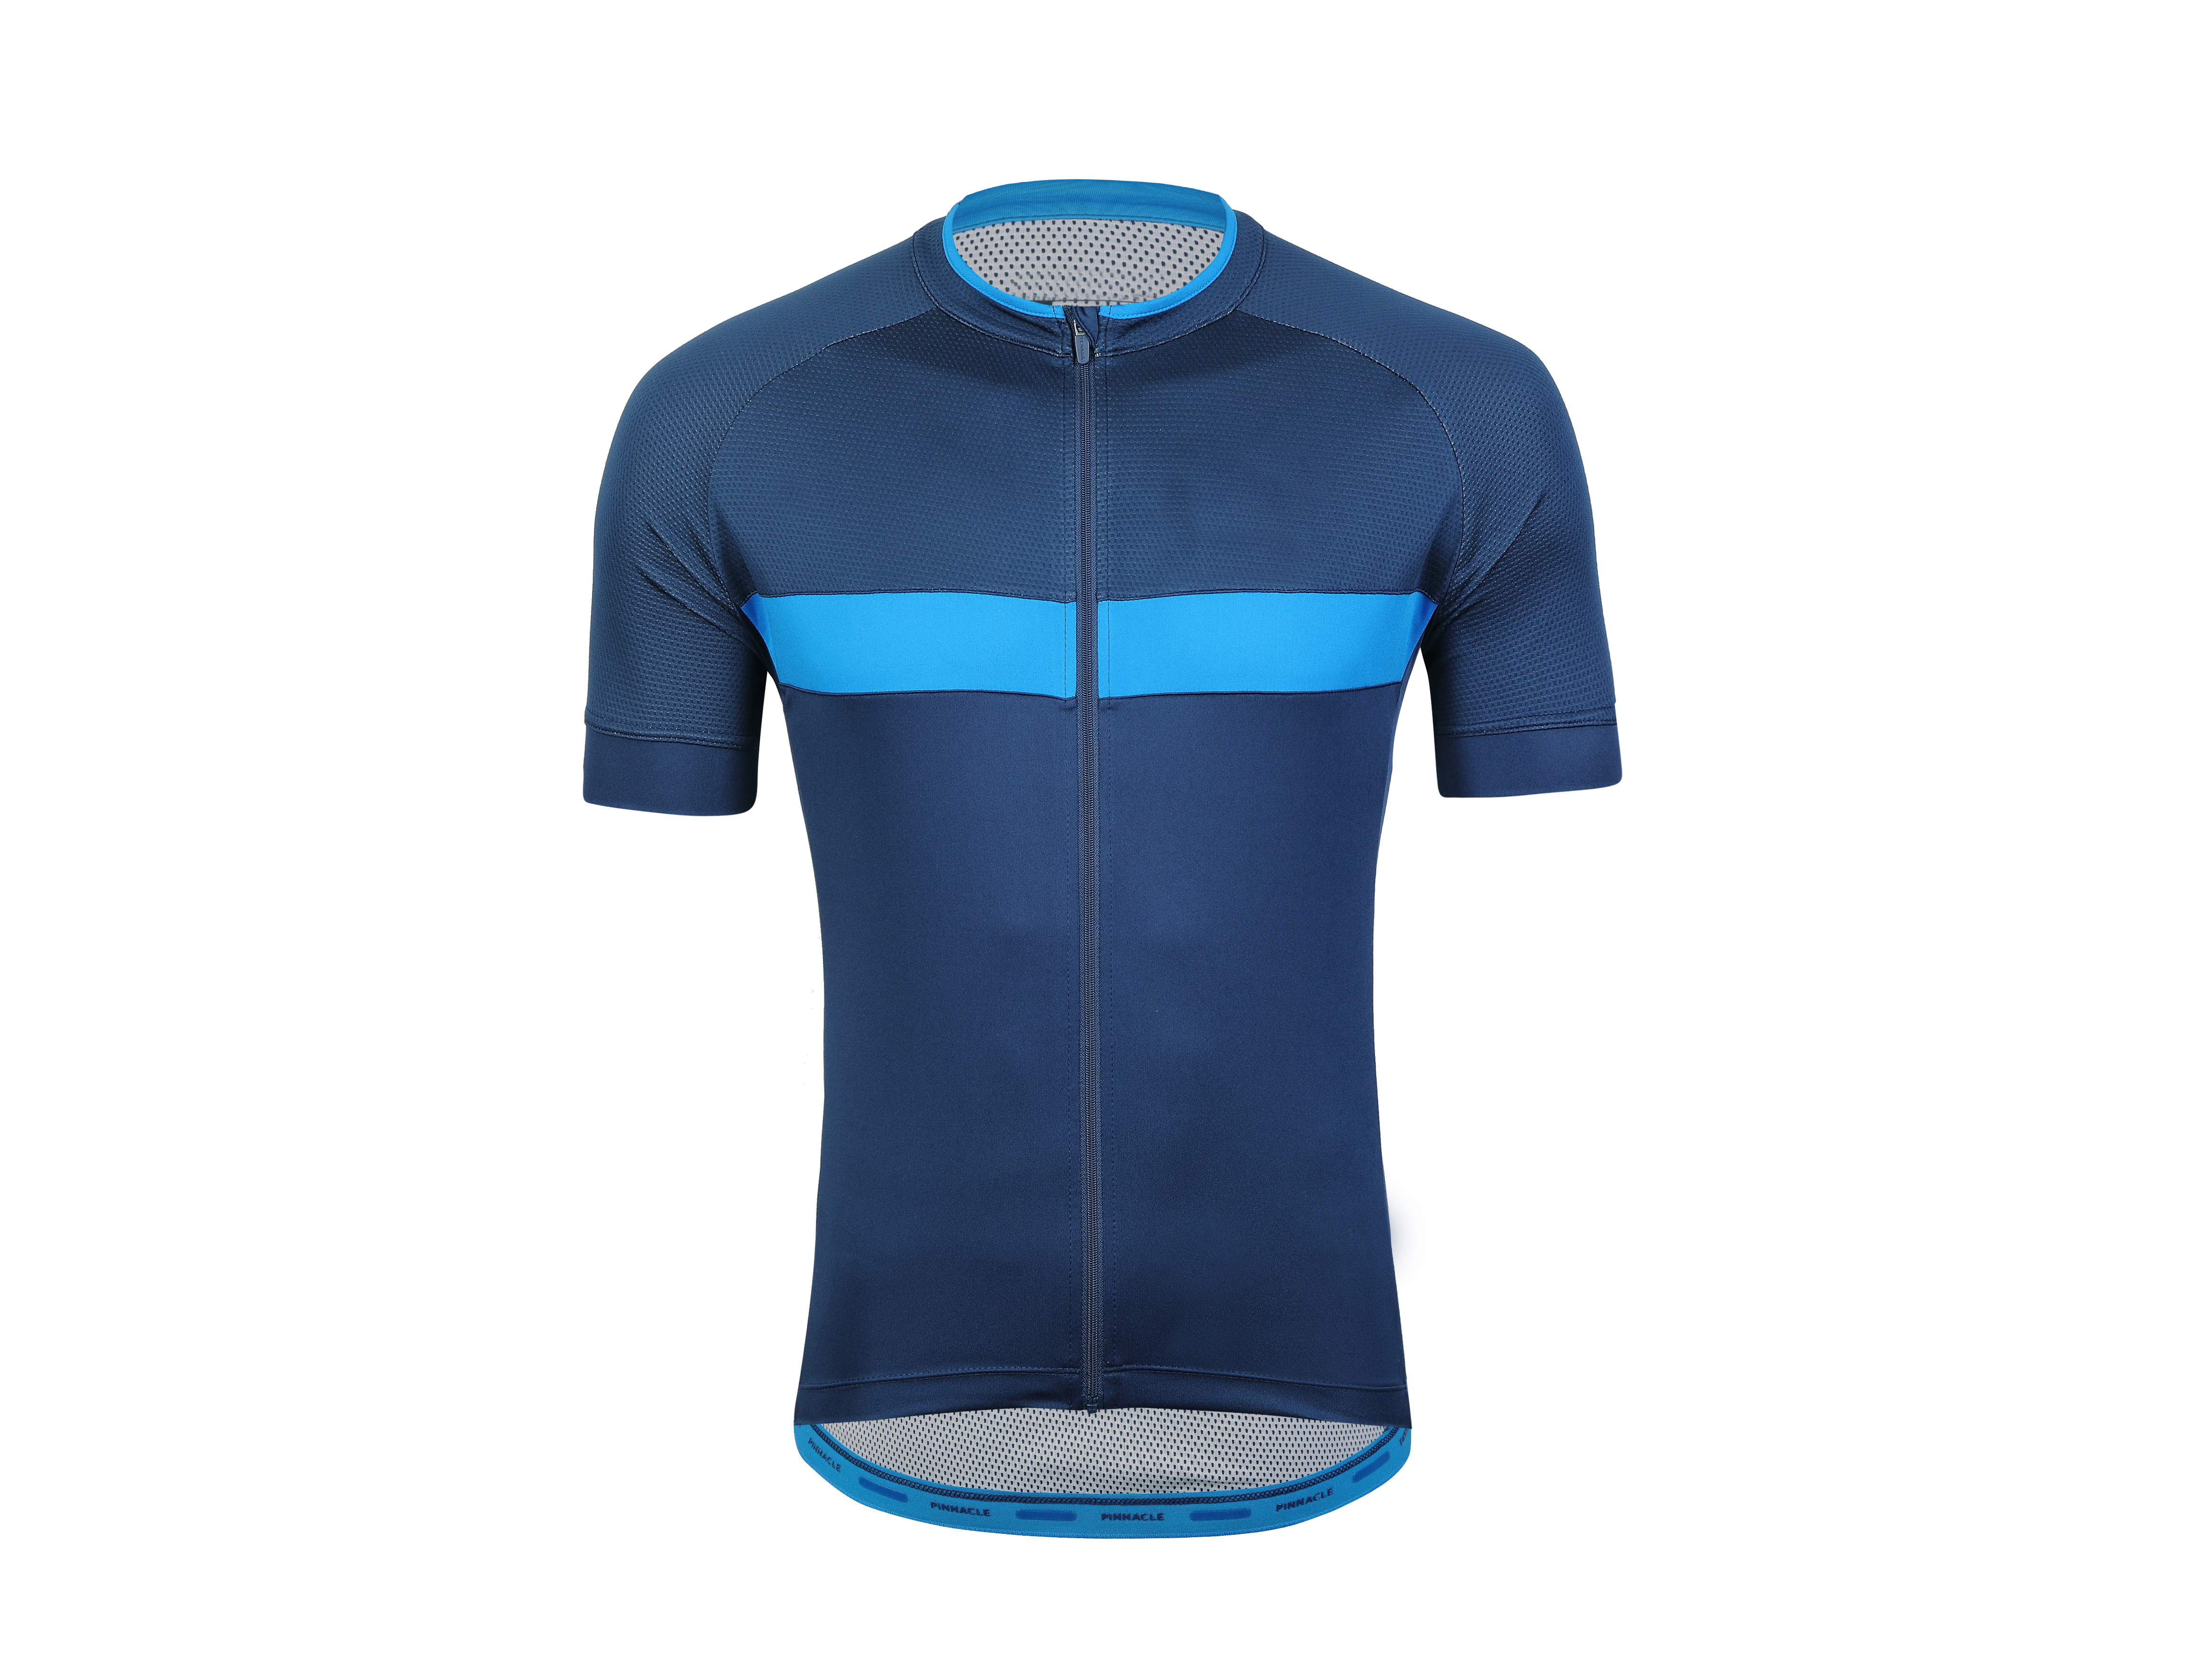 Men’s knitted cycling S/S Jersey